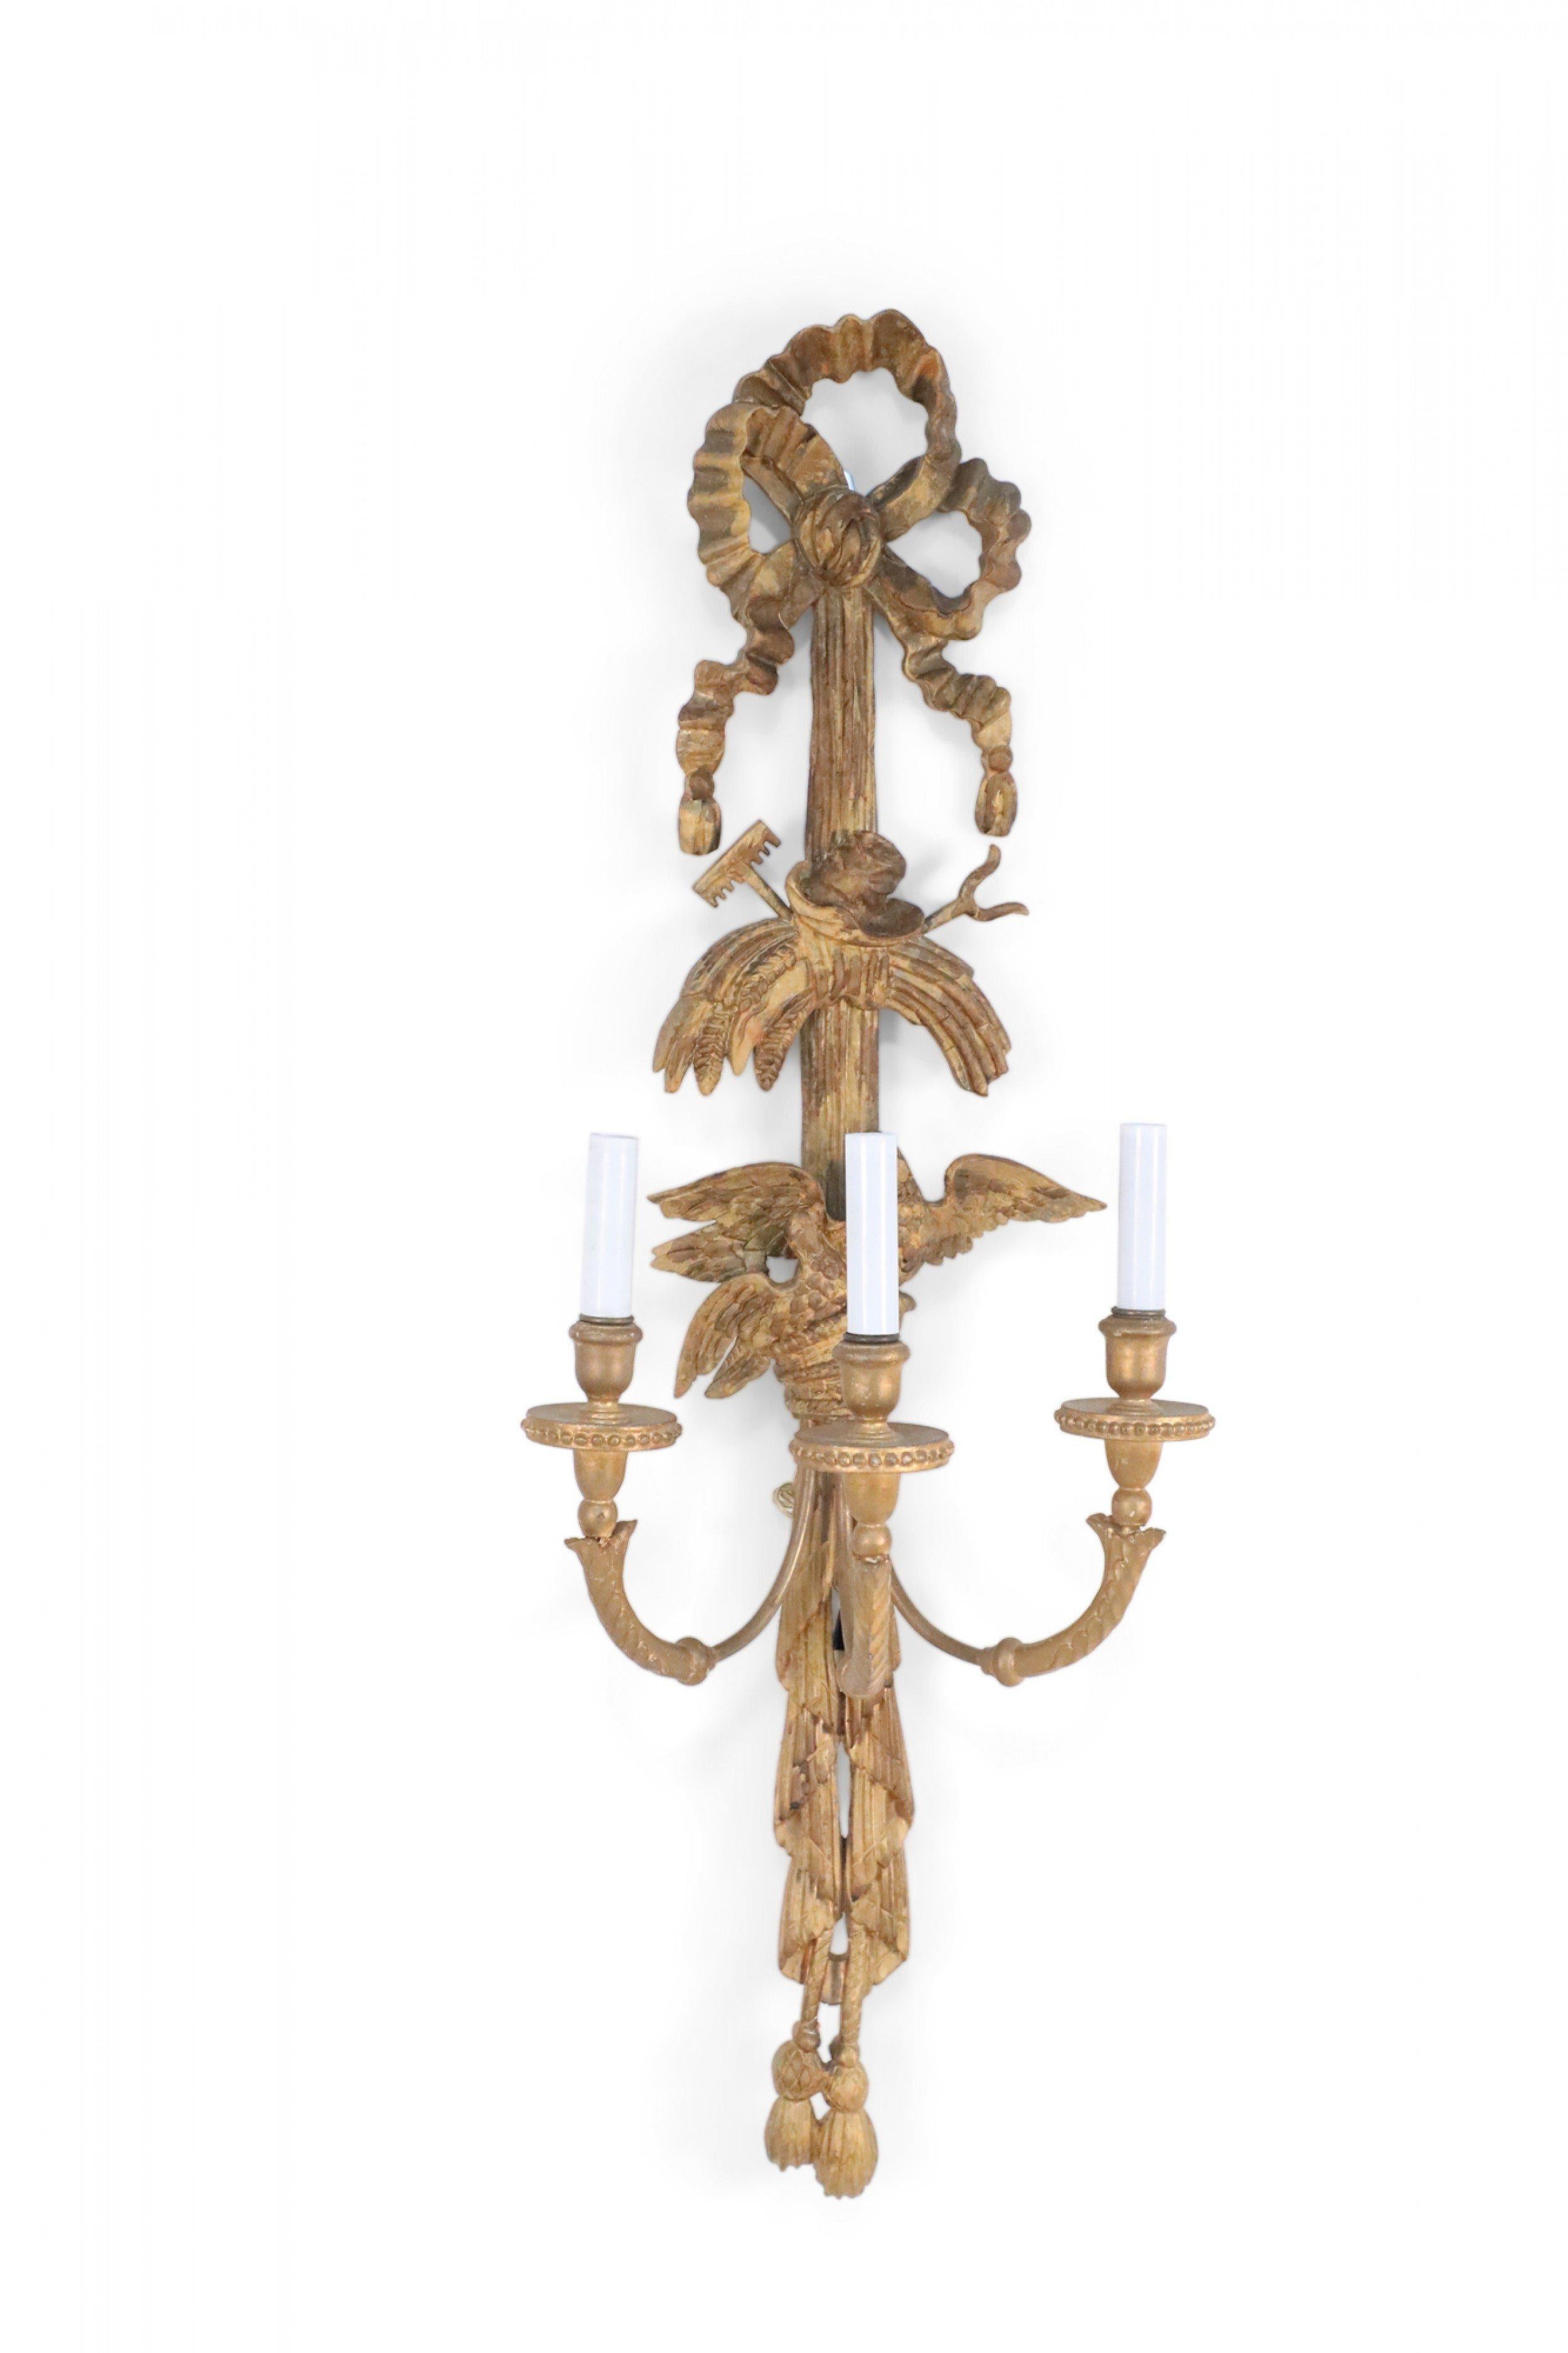 2 pairs of Louis XVI-style giltwood sconces carved with intricate details including bows, birds and tassels, and holding three lights (PRICED PER PAIR).
 